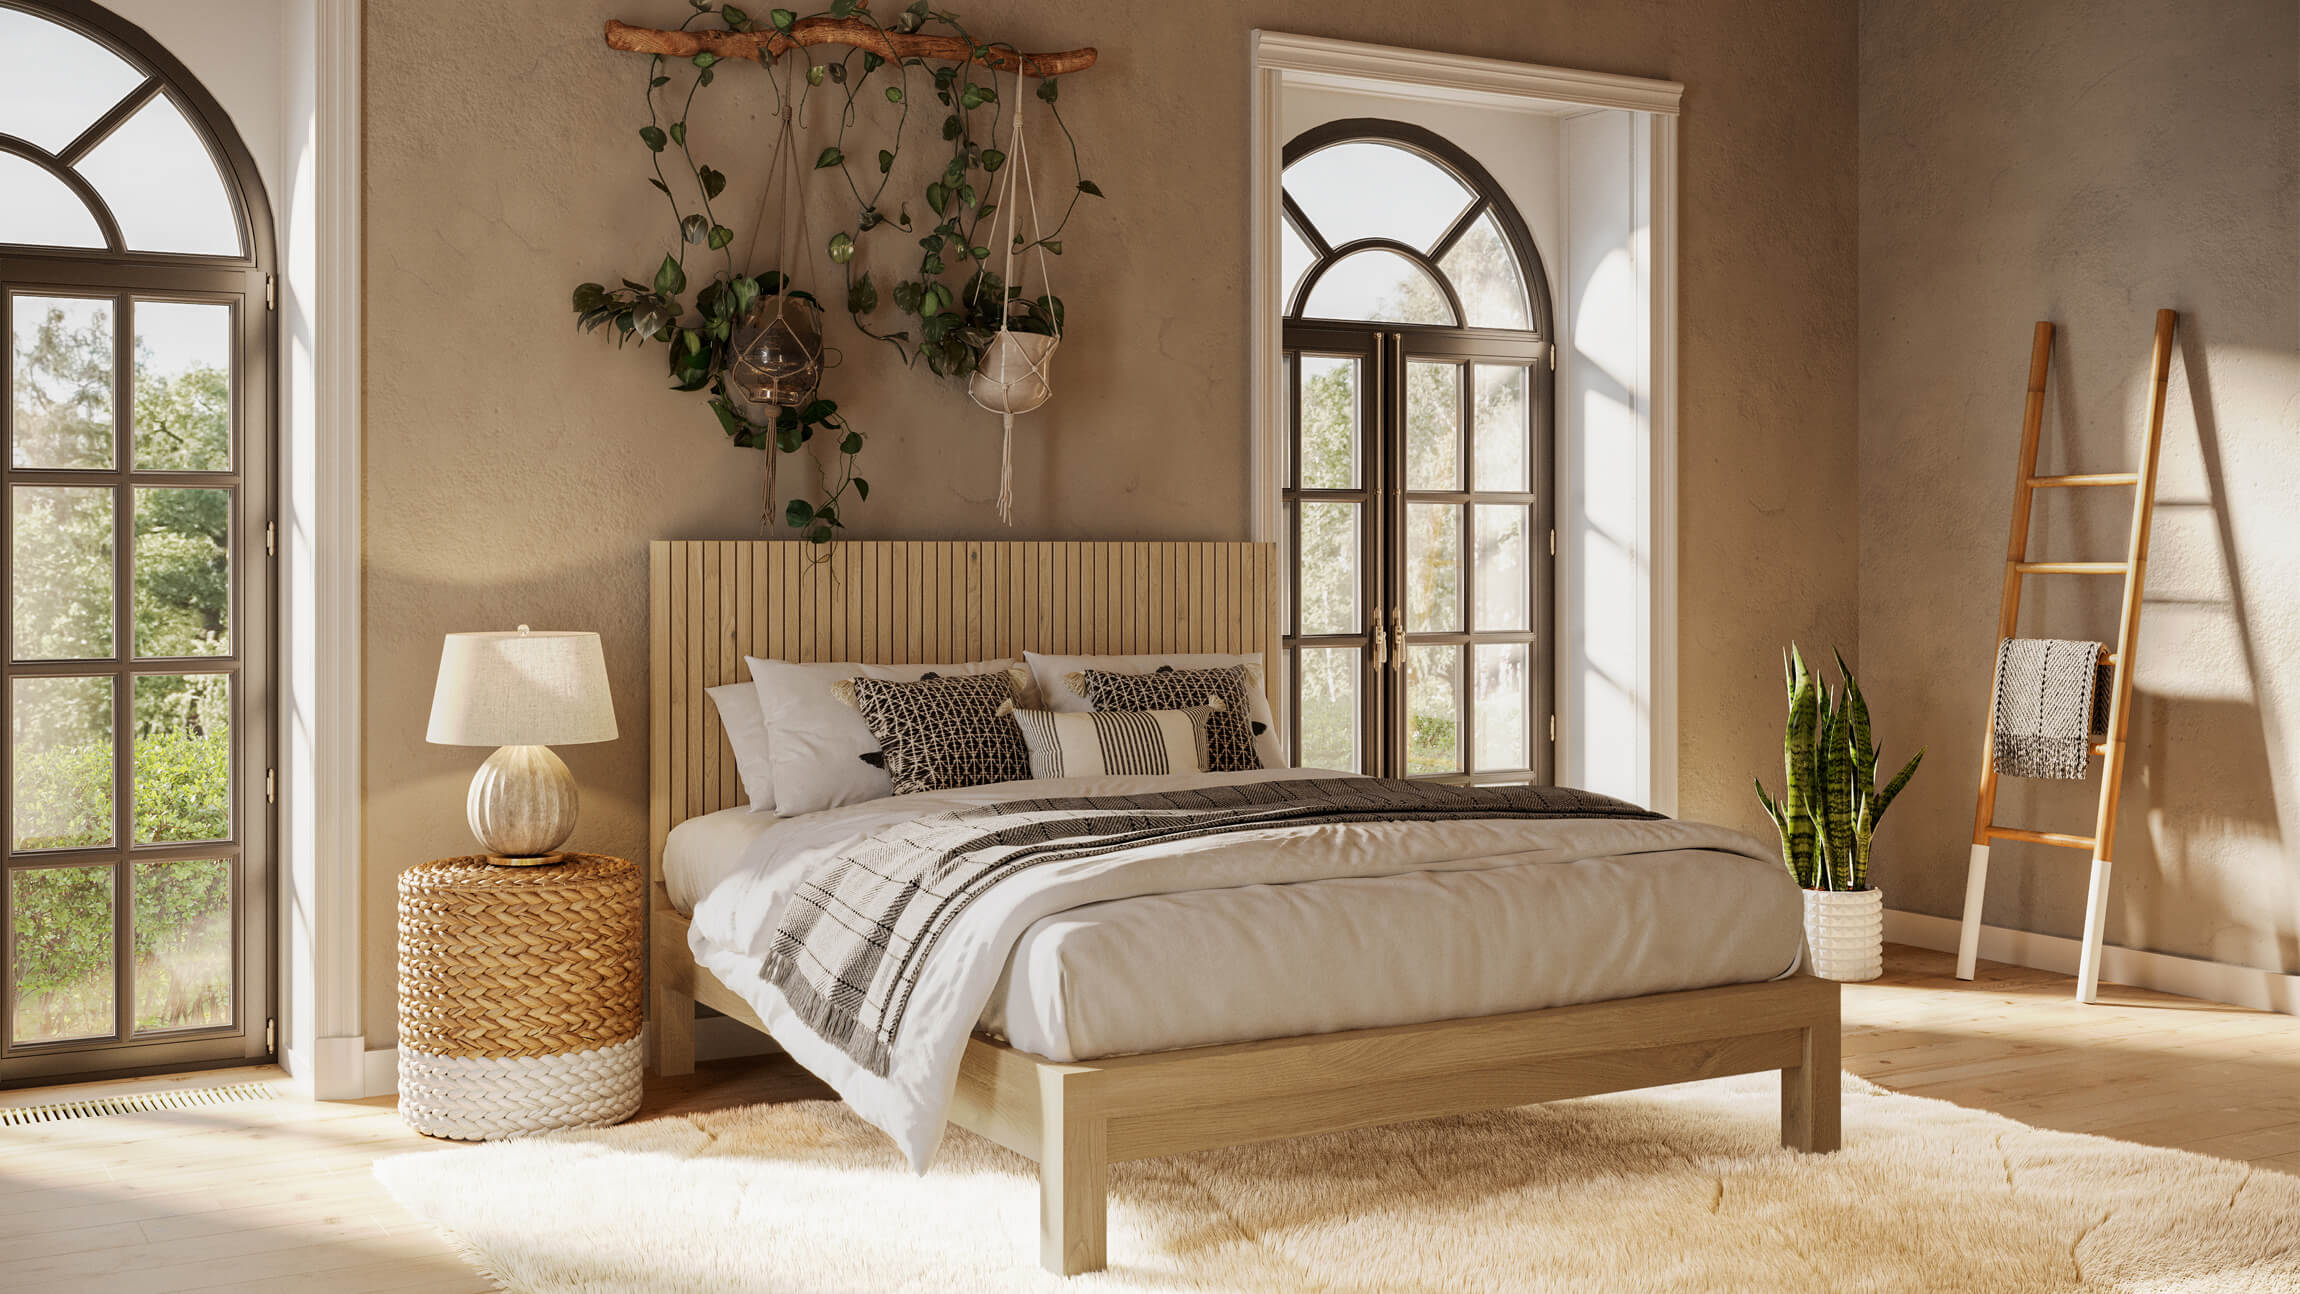 3D Rendering of a Stylish Bed in Light Wood